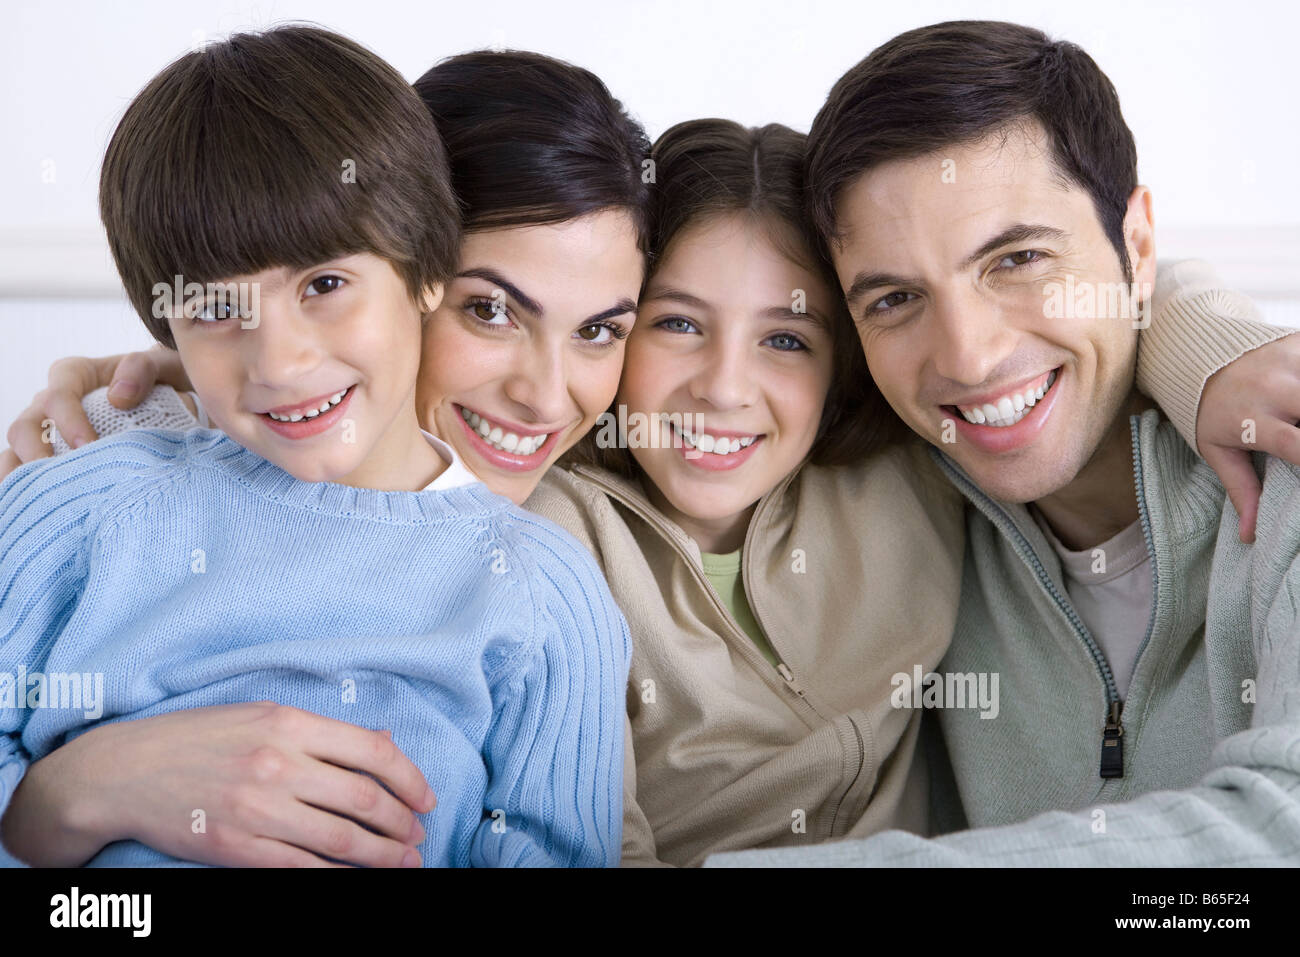 Portrait of family with two children, close-up Stock Photo